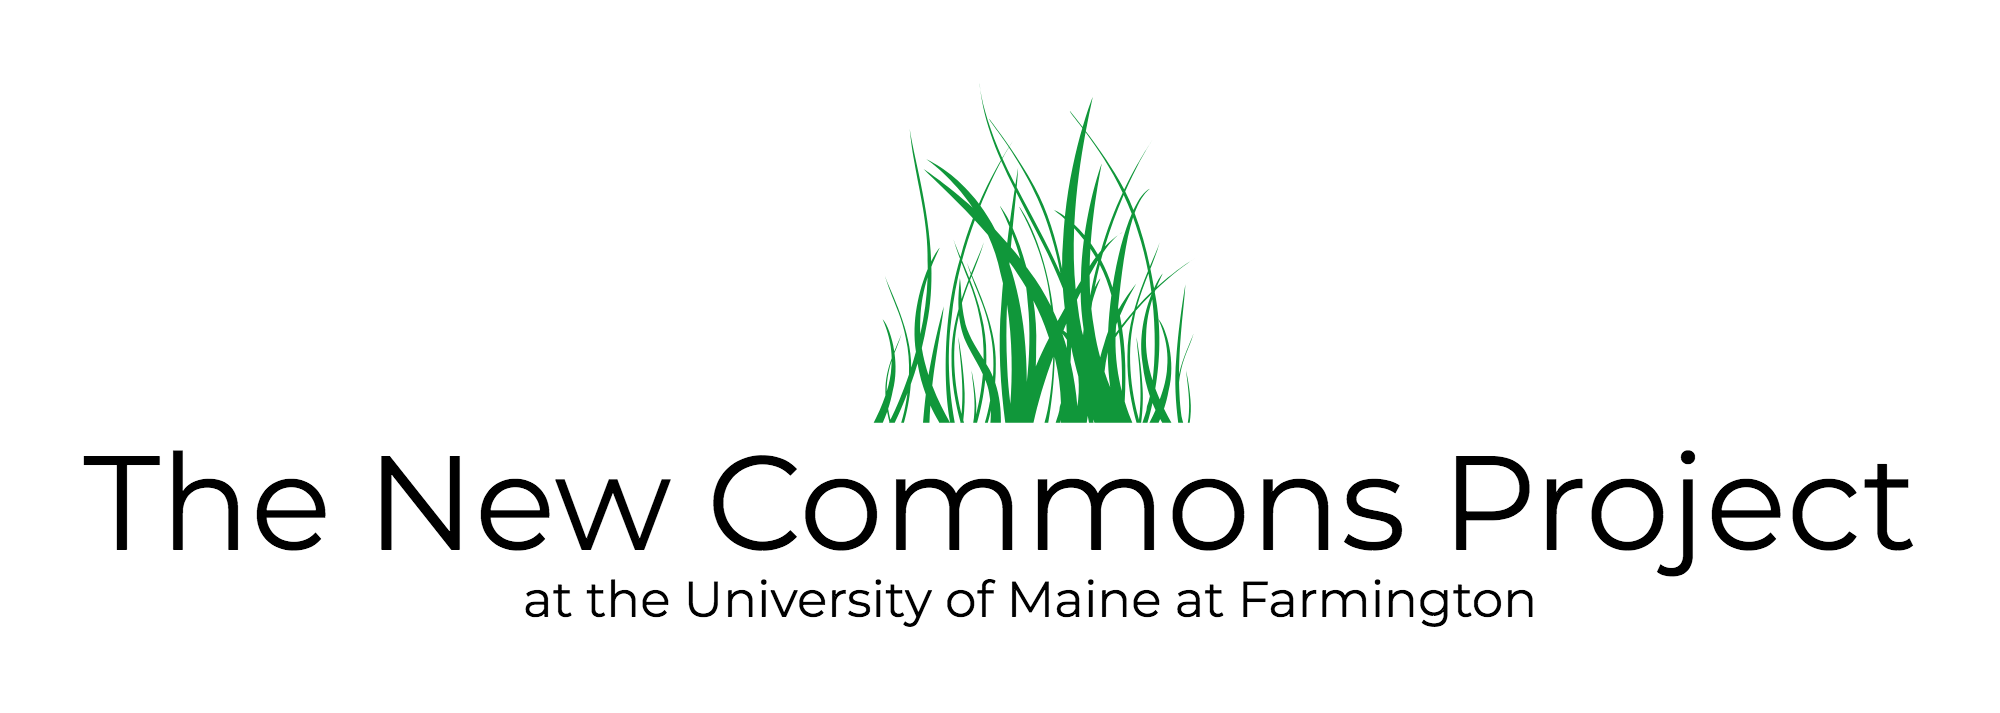 The New Commons Project Logo.